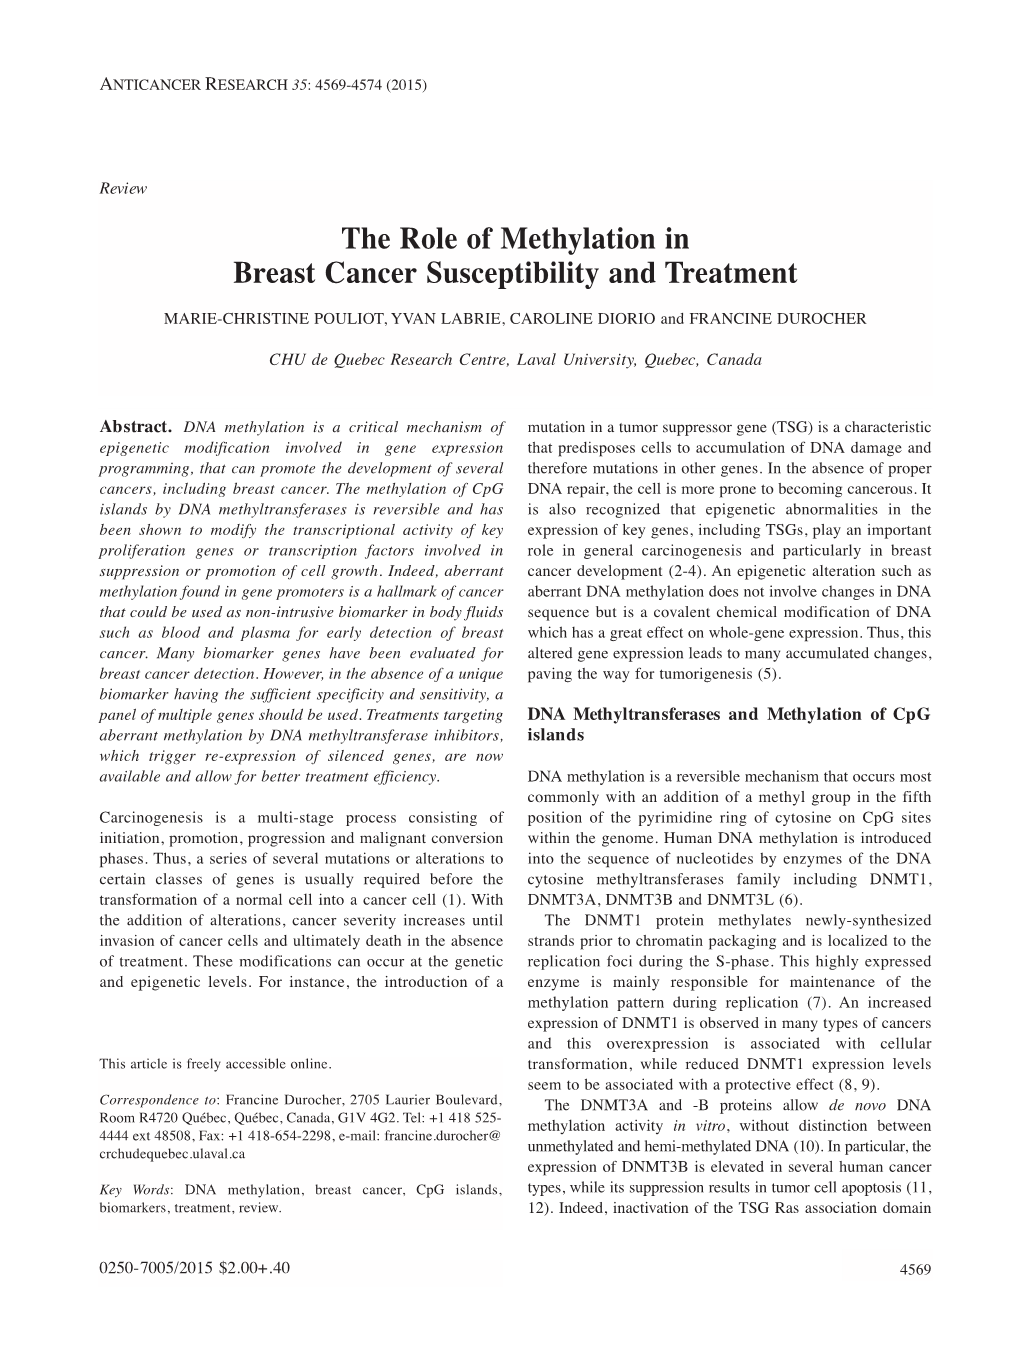 The Role of Methylation in Breast Cancer Susceptibility and Treatment